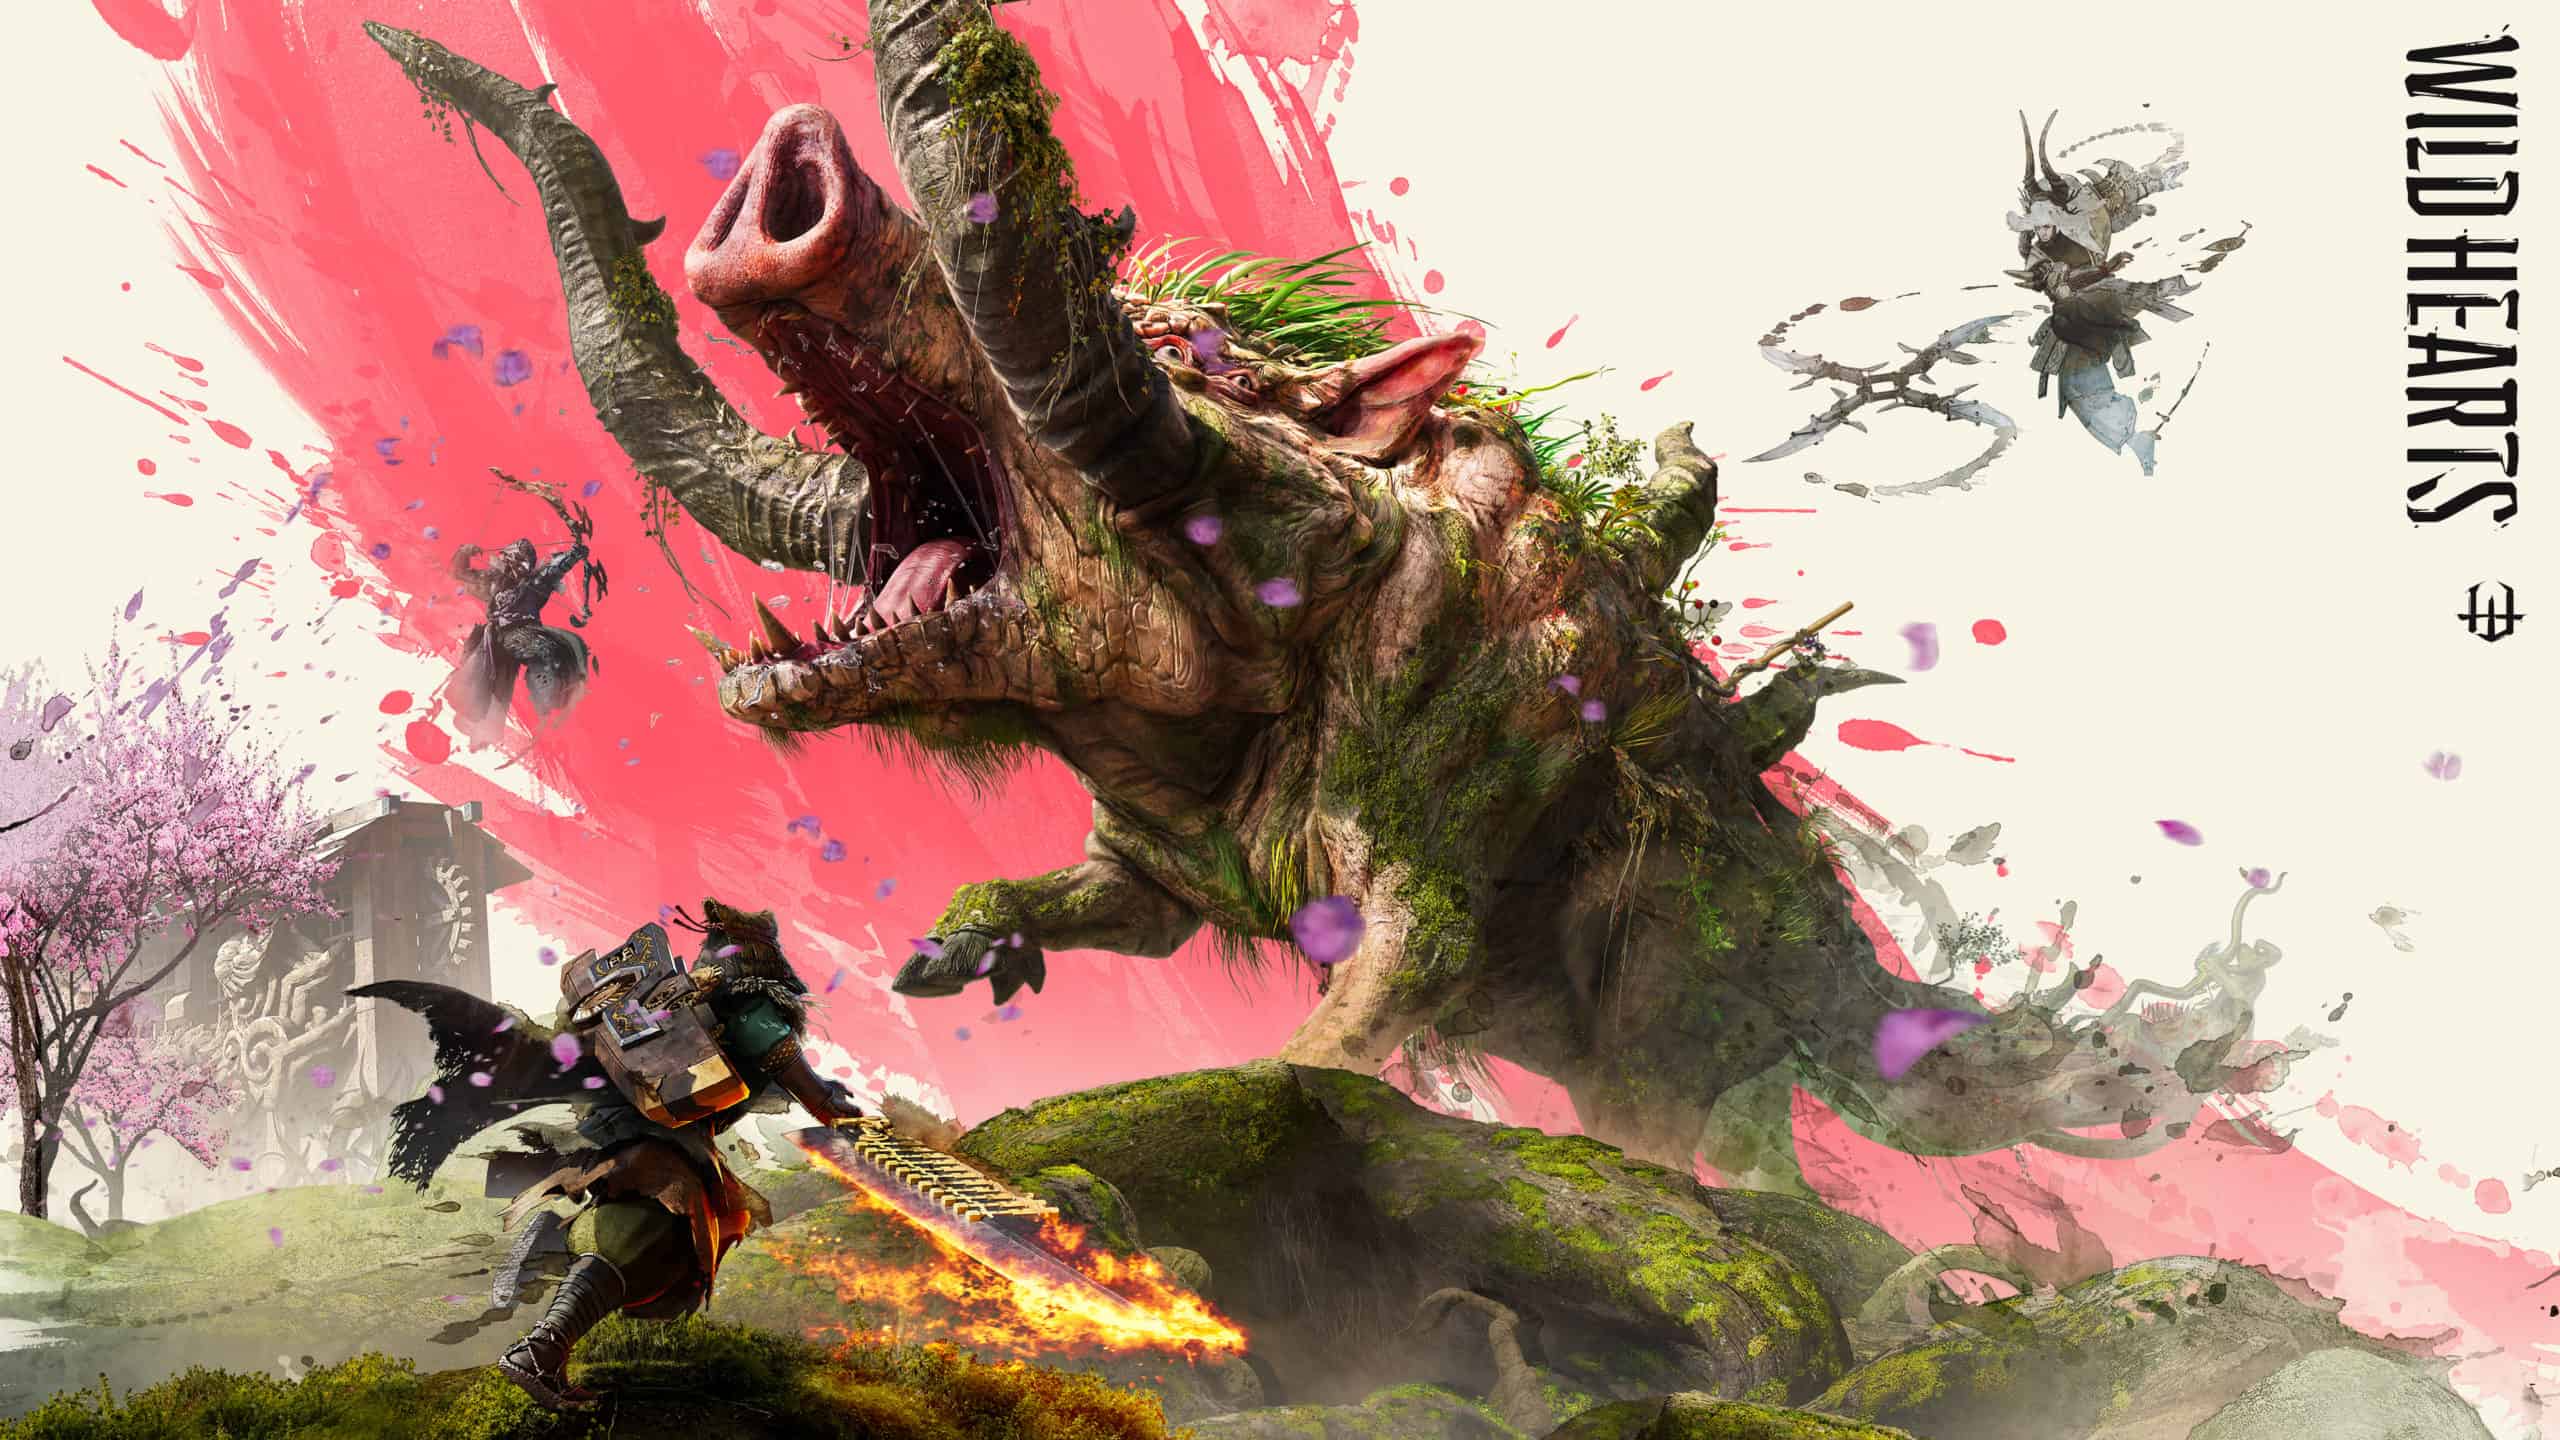 EA shows off its Monster Hunter-style game called Wild Hearts